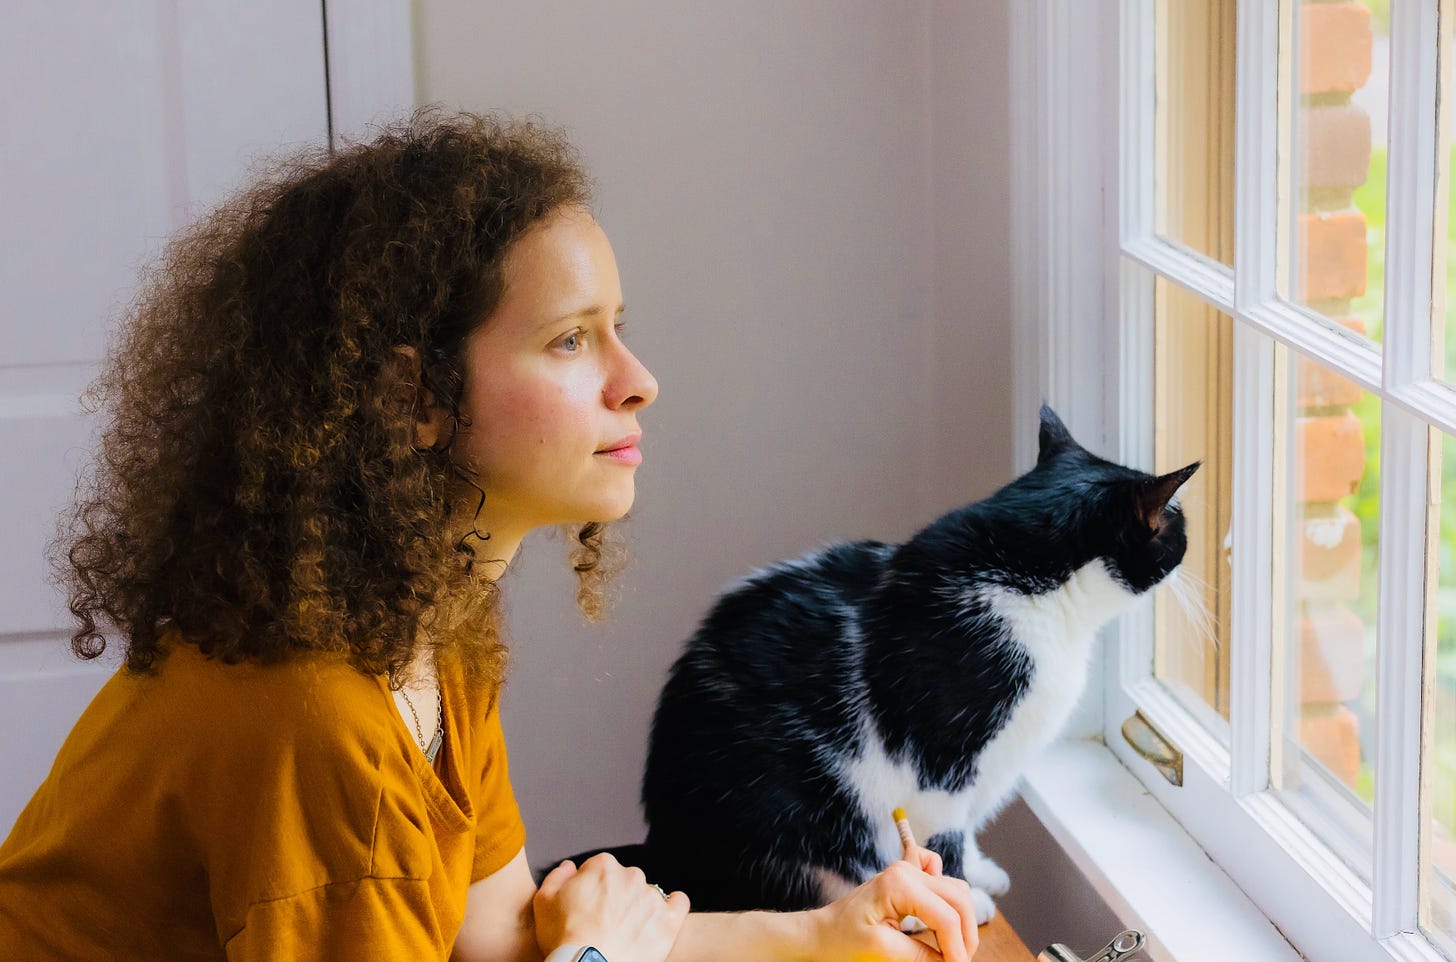 A woman with dark hair and a black and white cat staring out the window